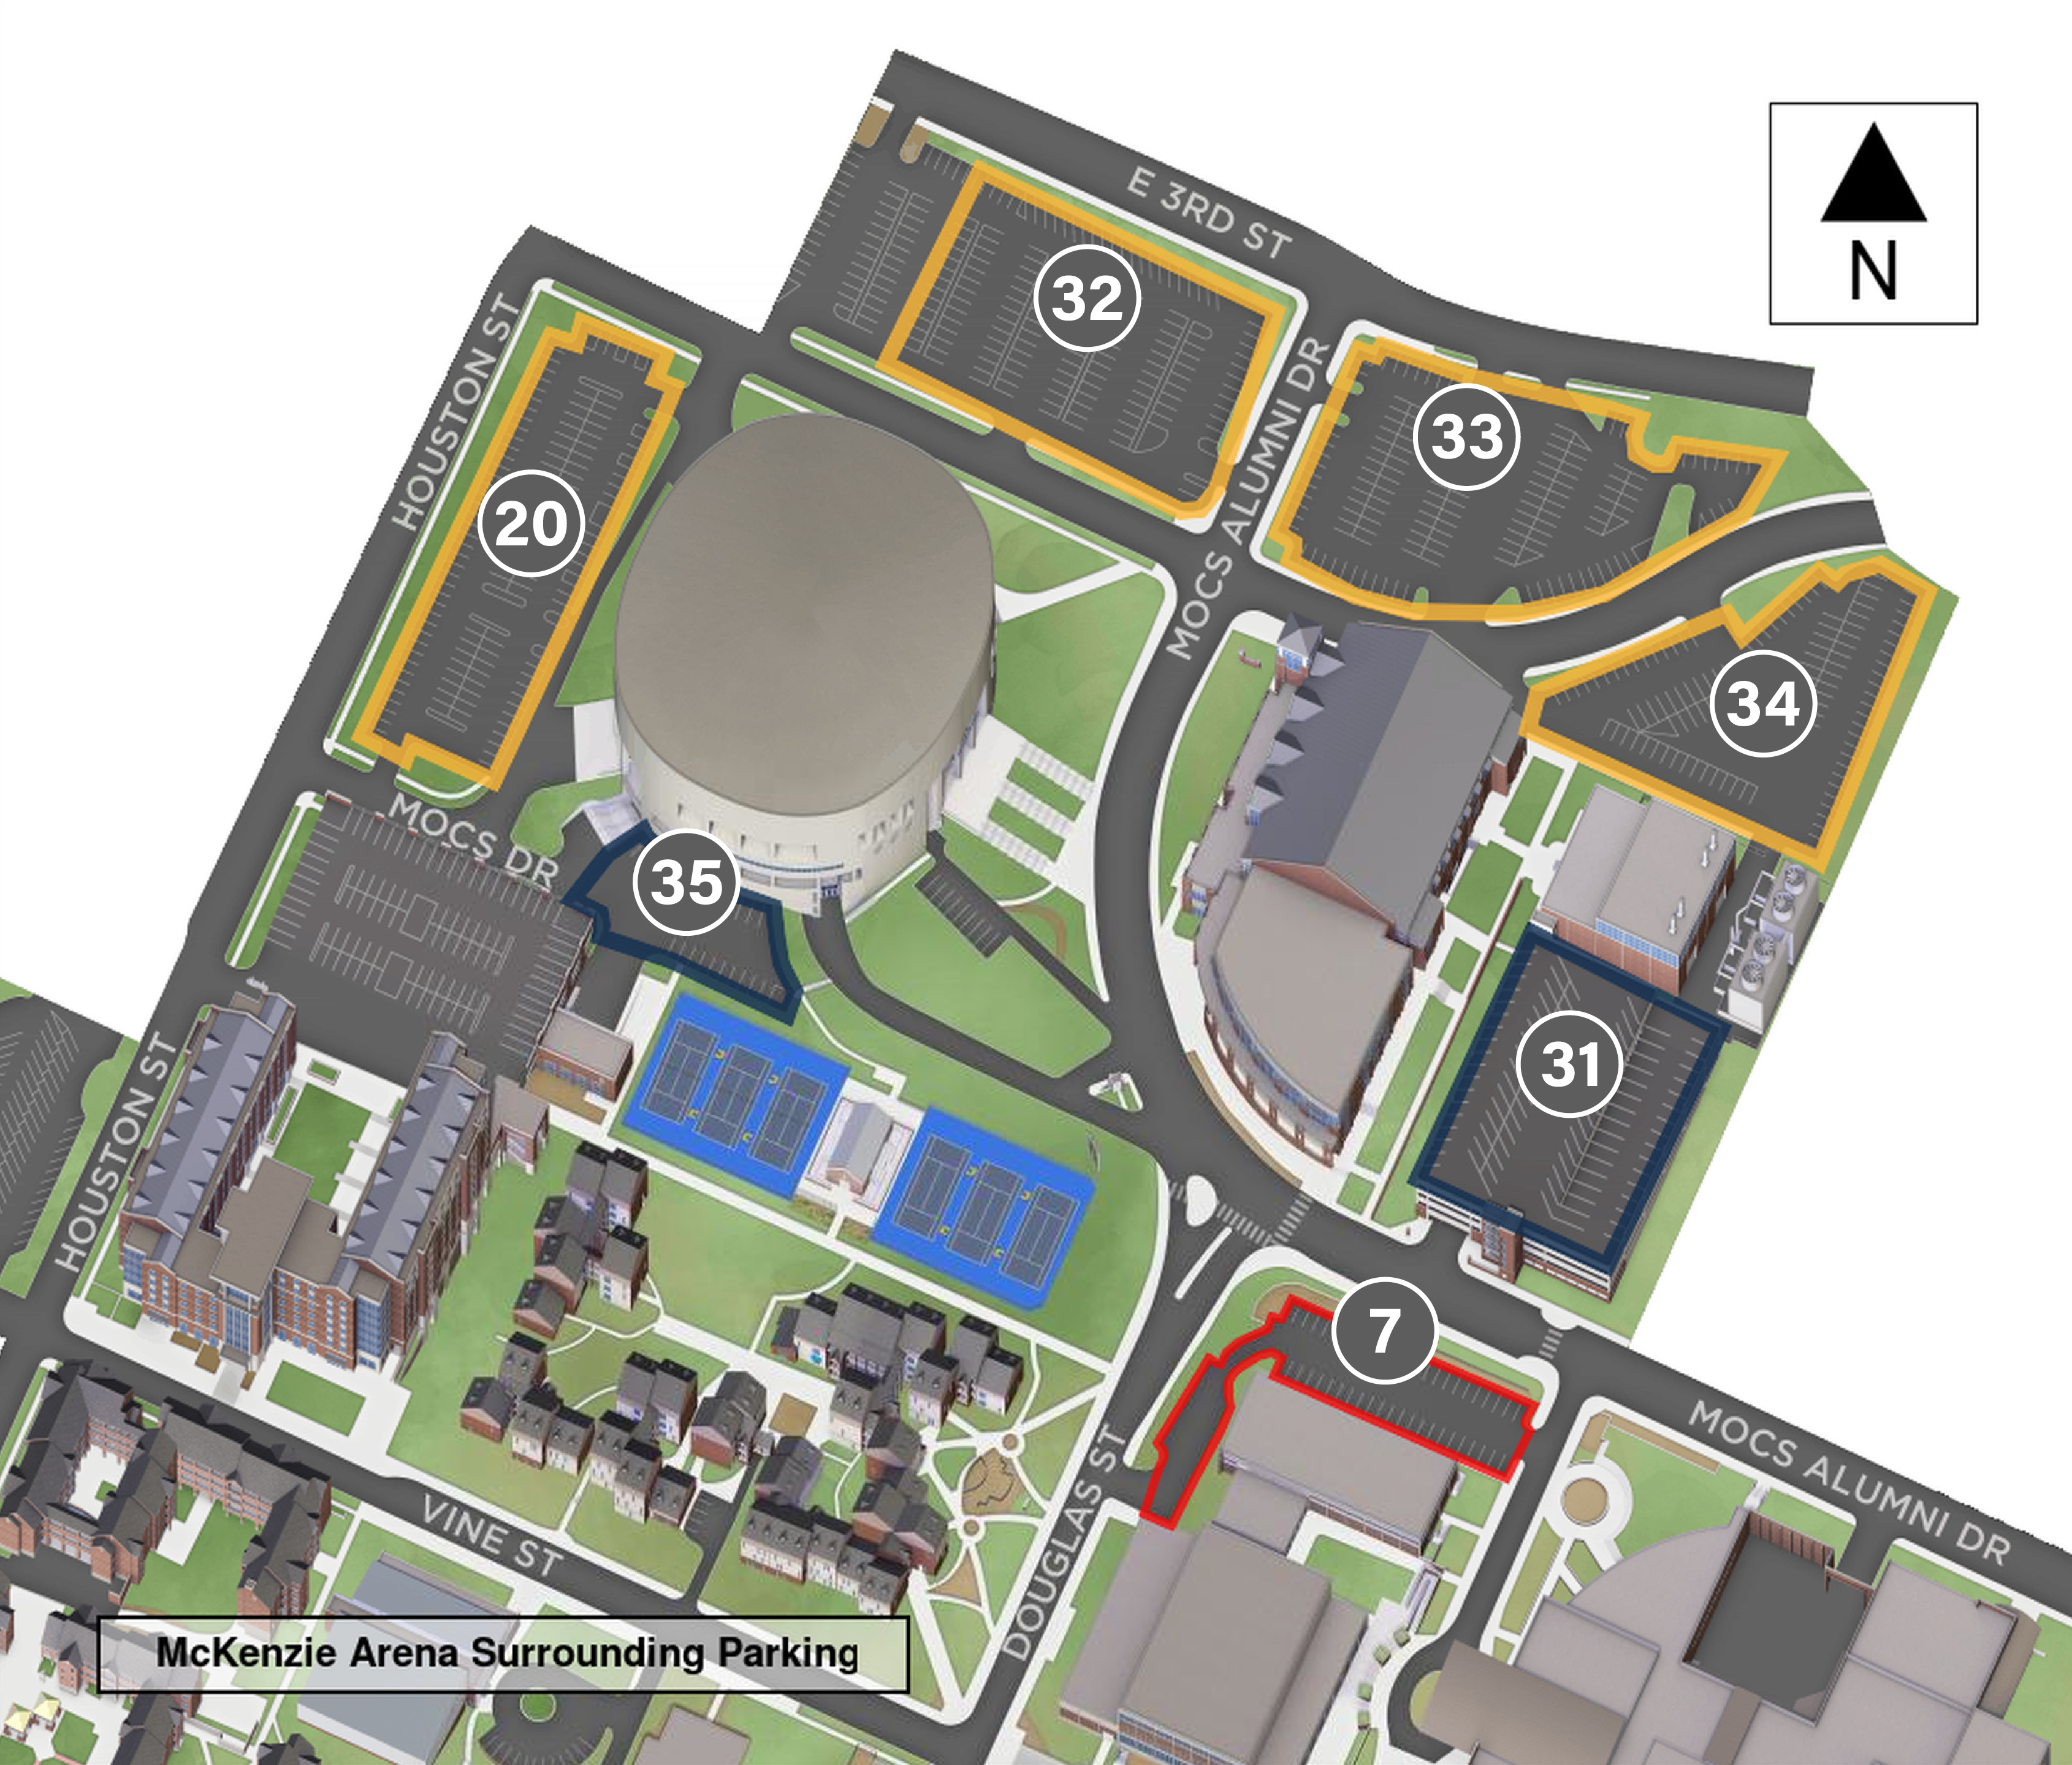 Graphic showing parking lots used for events at McKenzie Arena